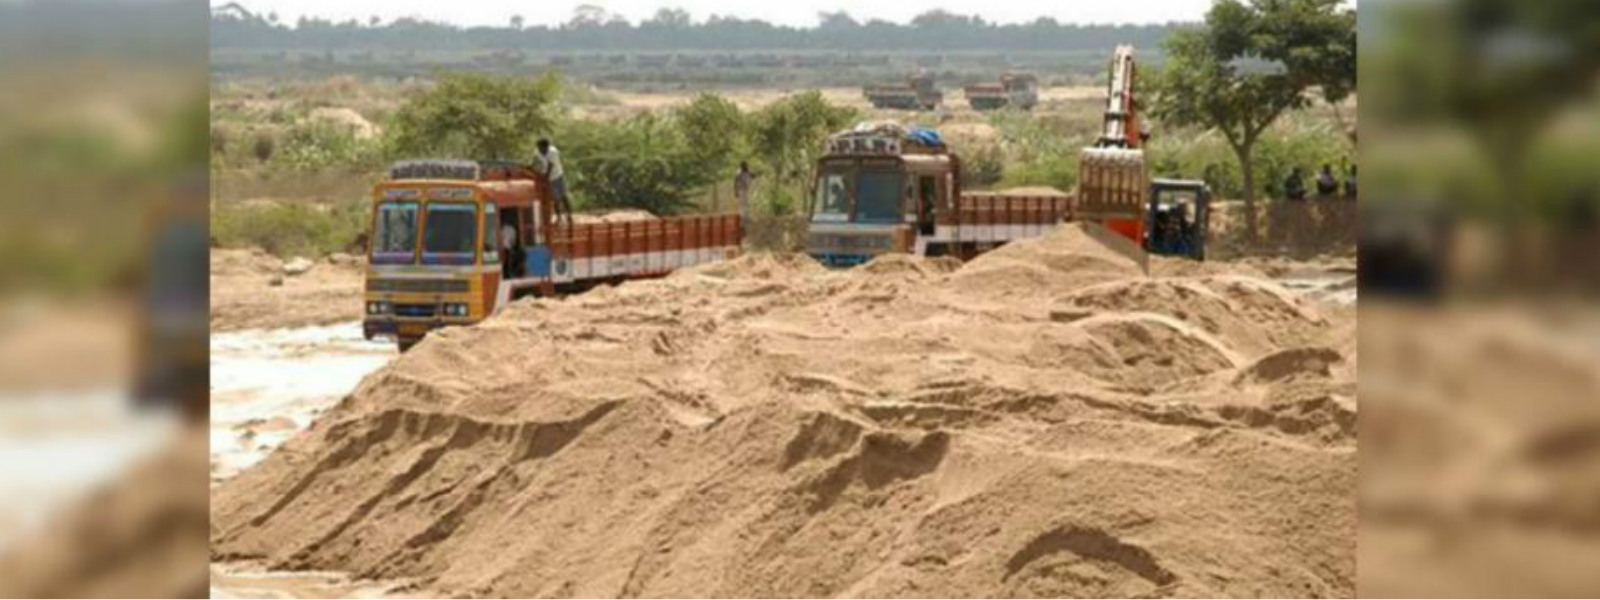 Sand transportation licenses to be issued